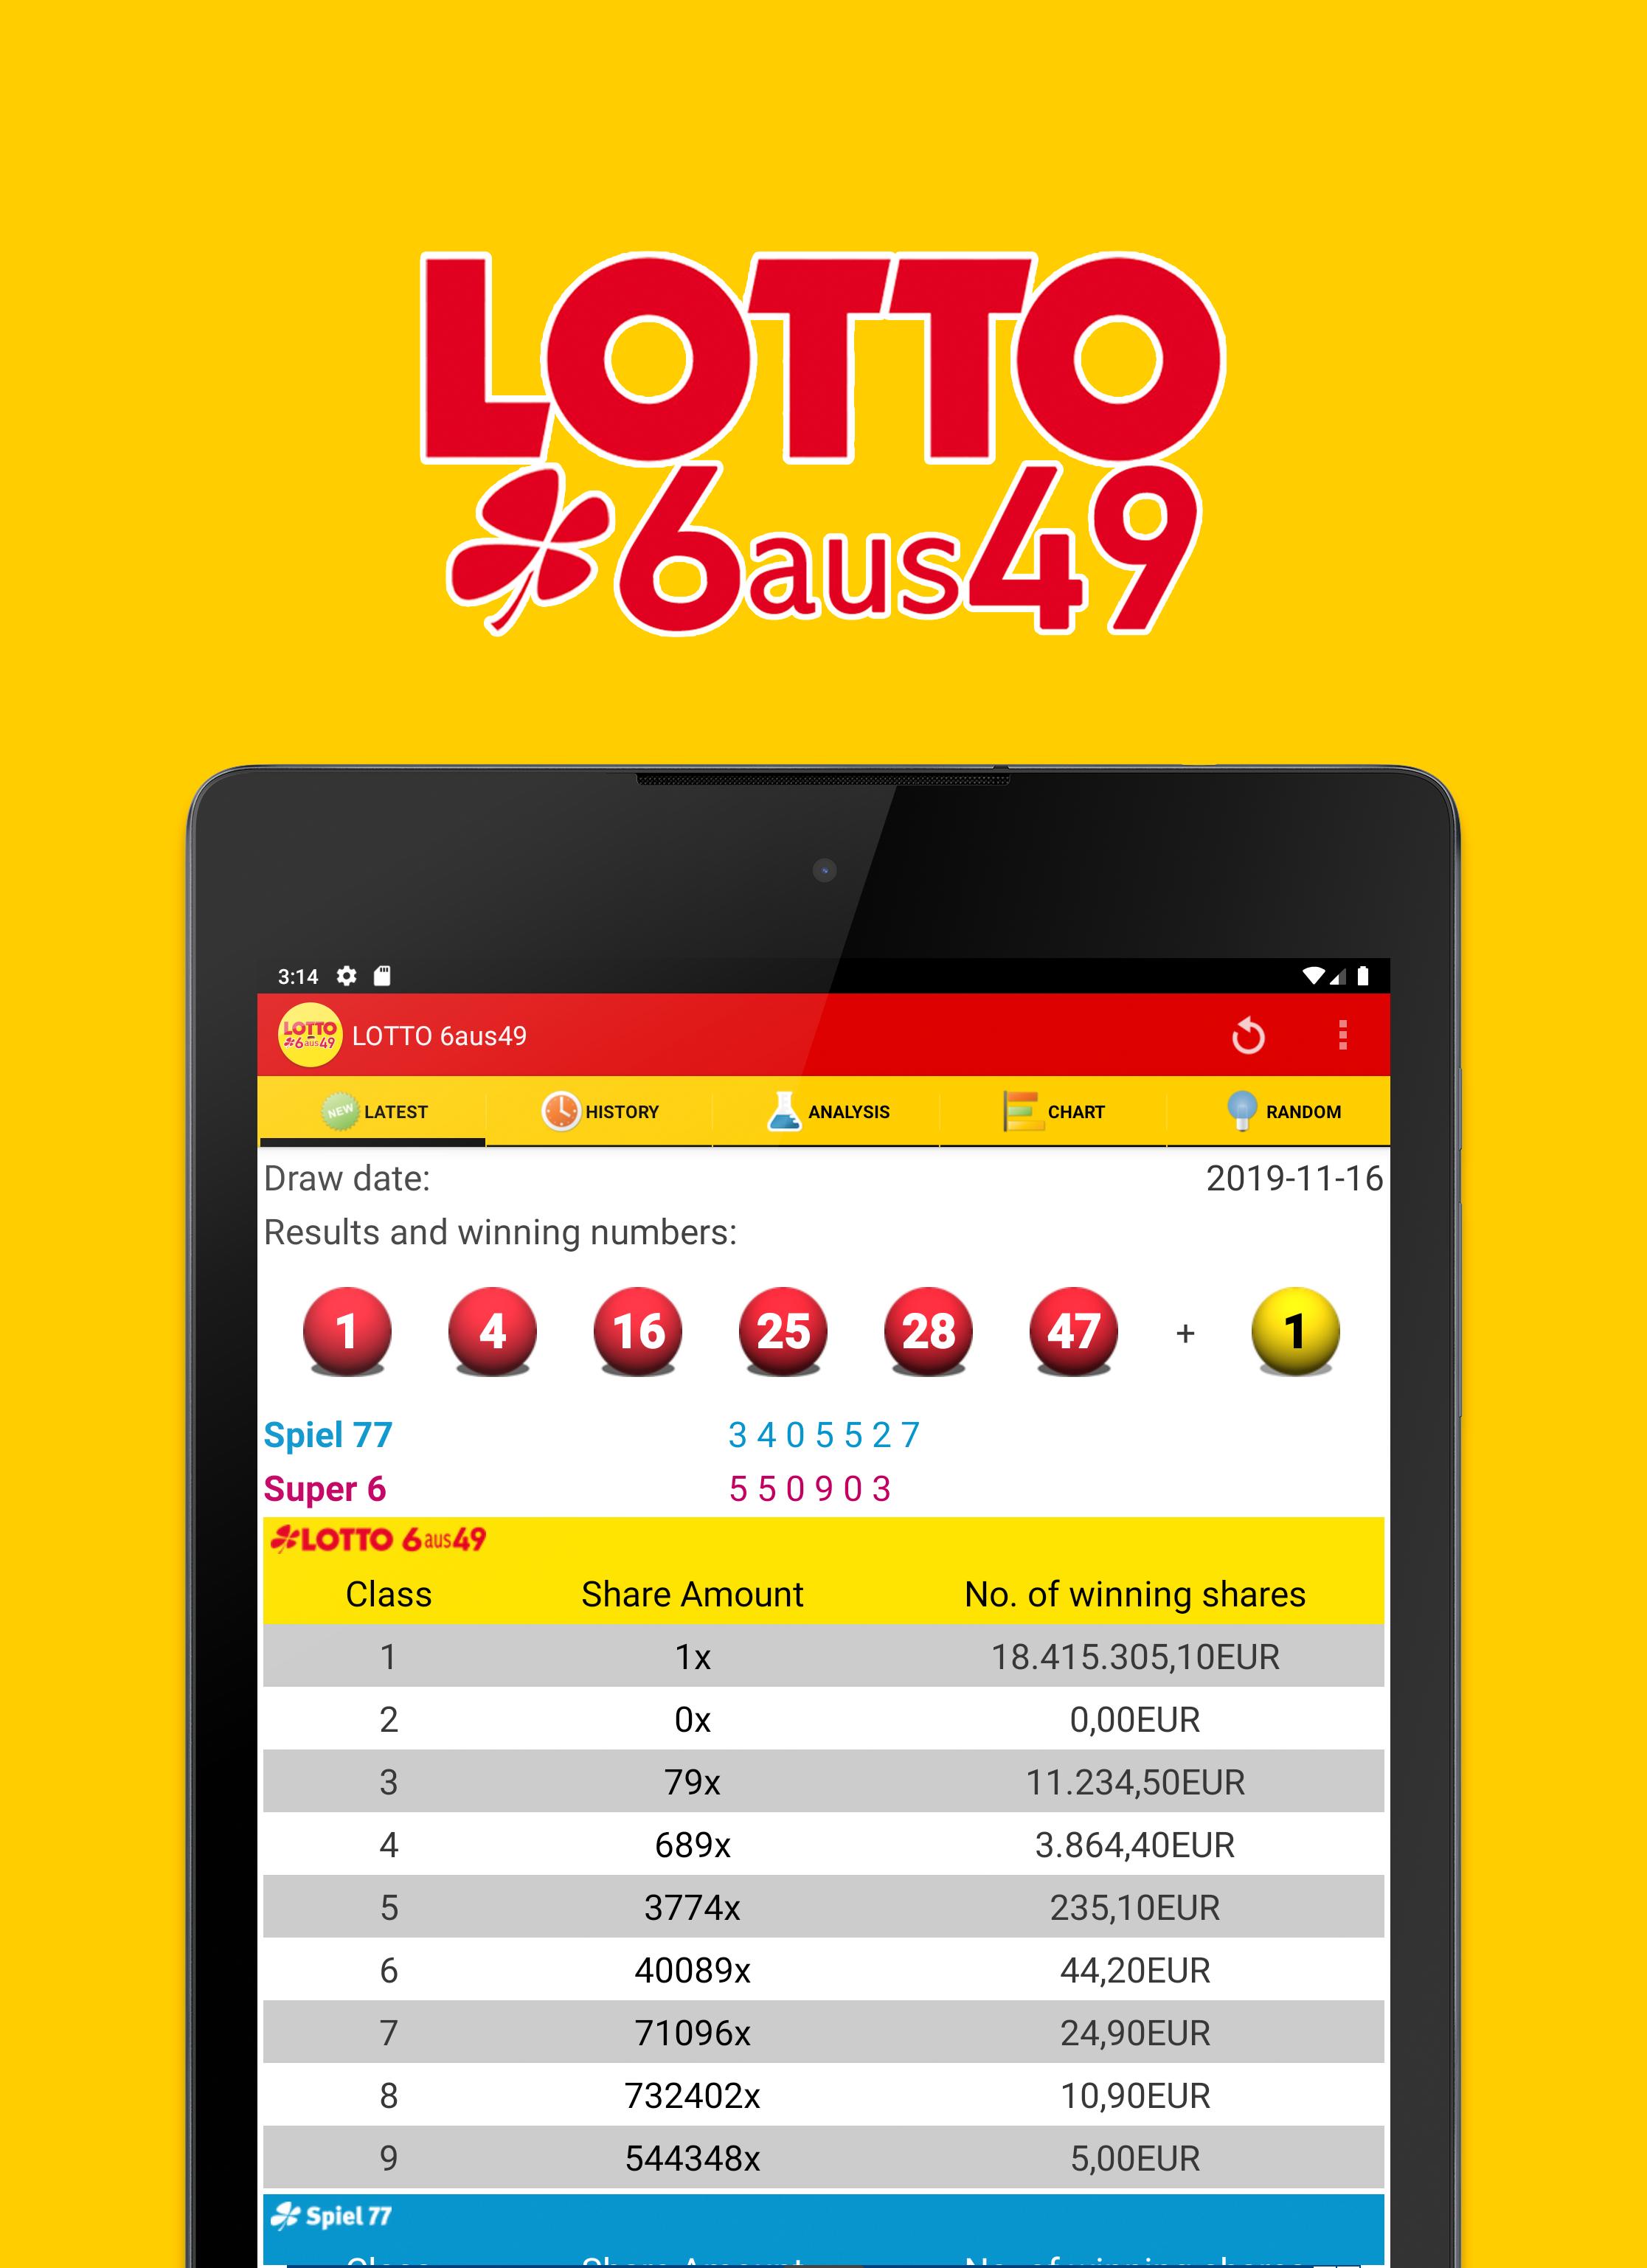 LOTTO 6aus49 for Android - APK Download